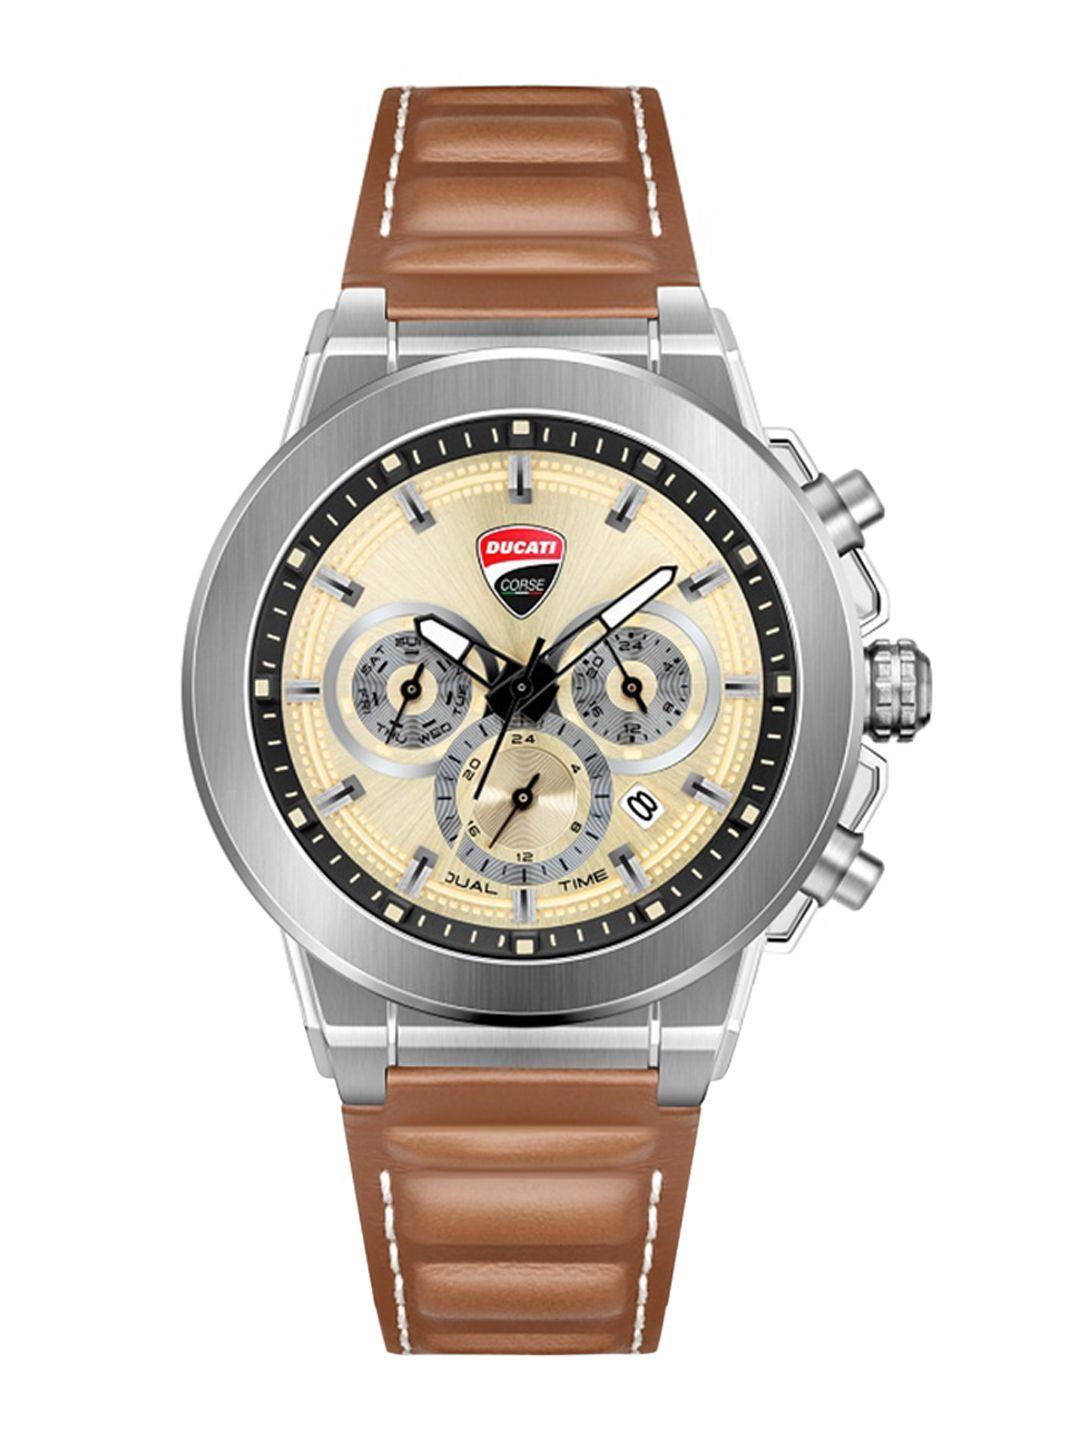 ducati-corse-men-beige-printed-dial-&-brown-leather-bracelet-style-straps-analogue-watch